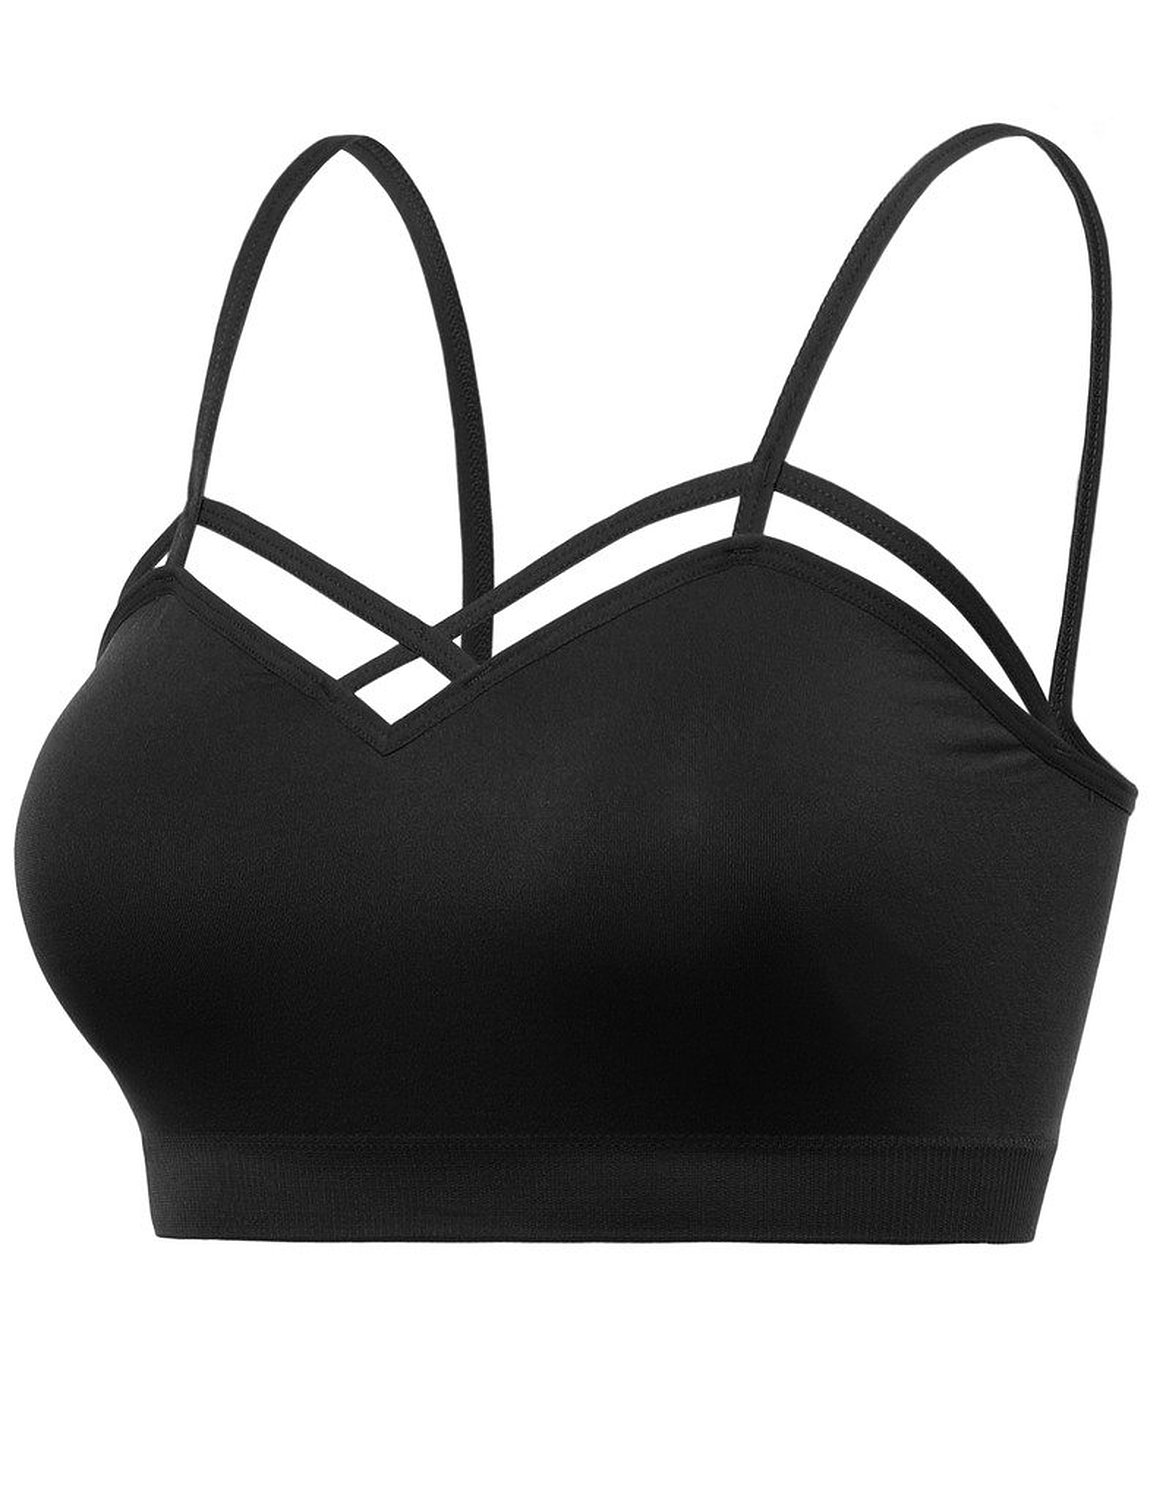 FPT Womens Stretchy Seamless Geometric Peek-a-Boo Cut-Out Bralette